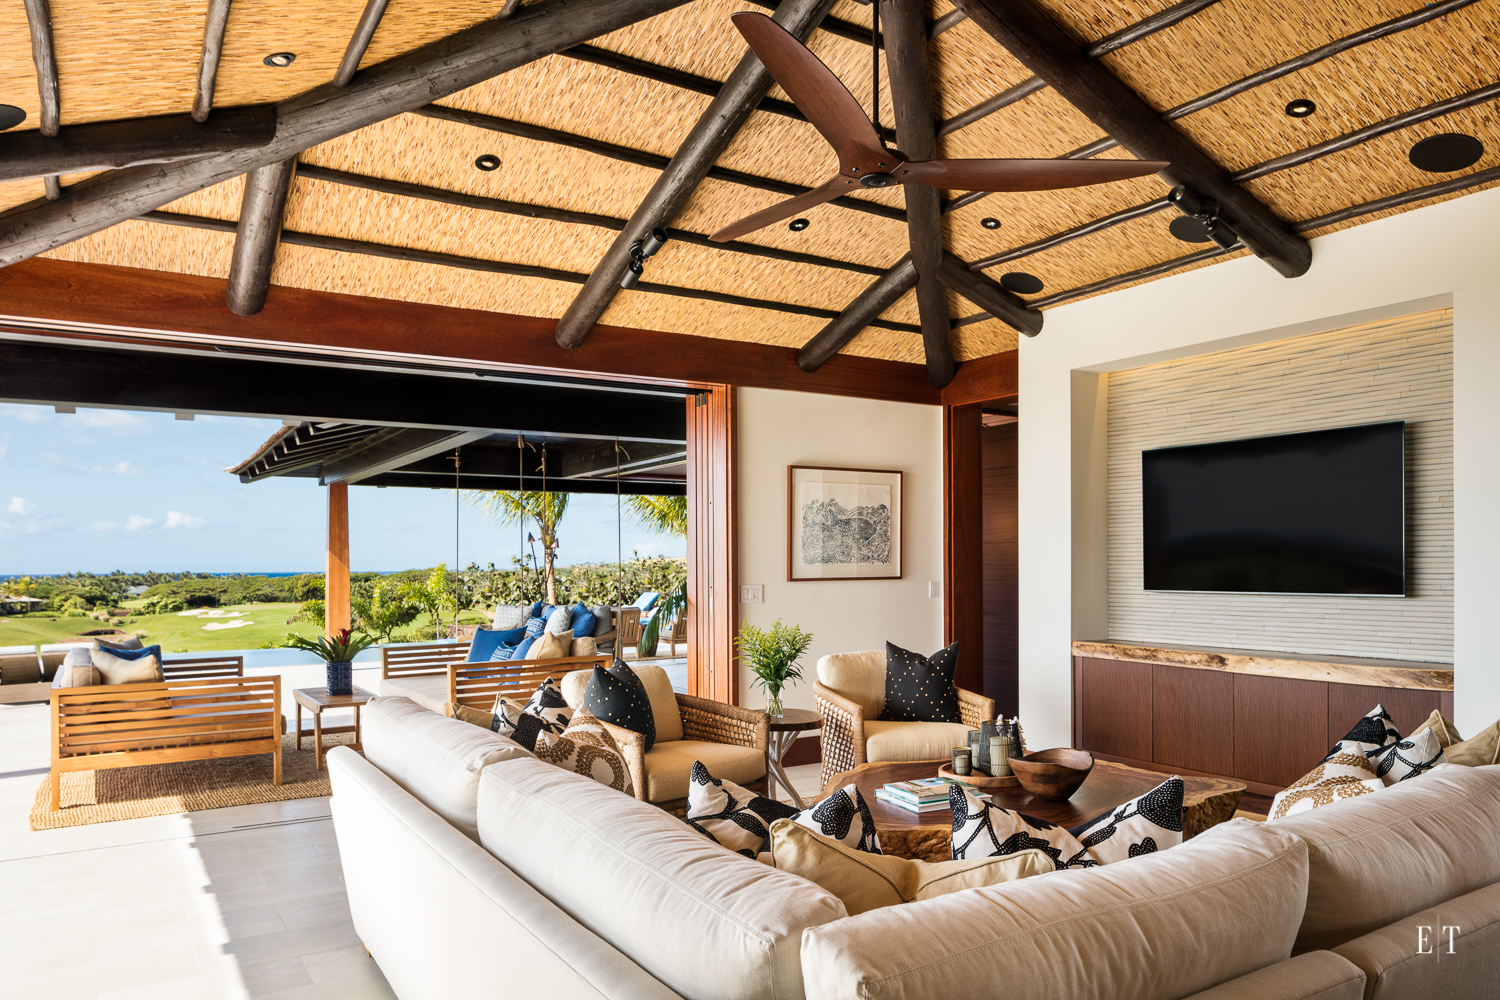  Indoor Outdoor living at its finest at Hale Kahakai, Kukui’ula on the South Shore of Kauai - Pu’uwai Design + Build | Photography by Ethan Tweedie 